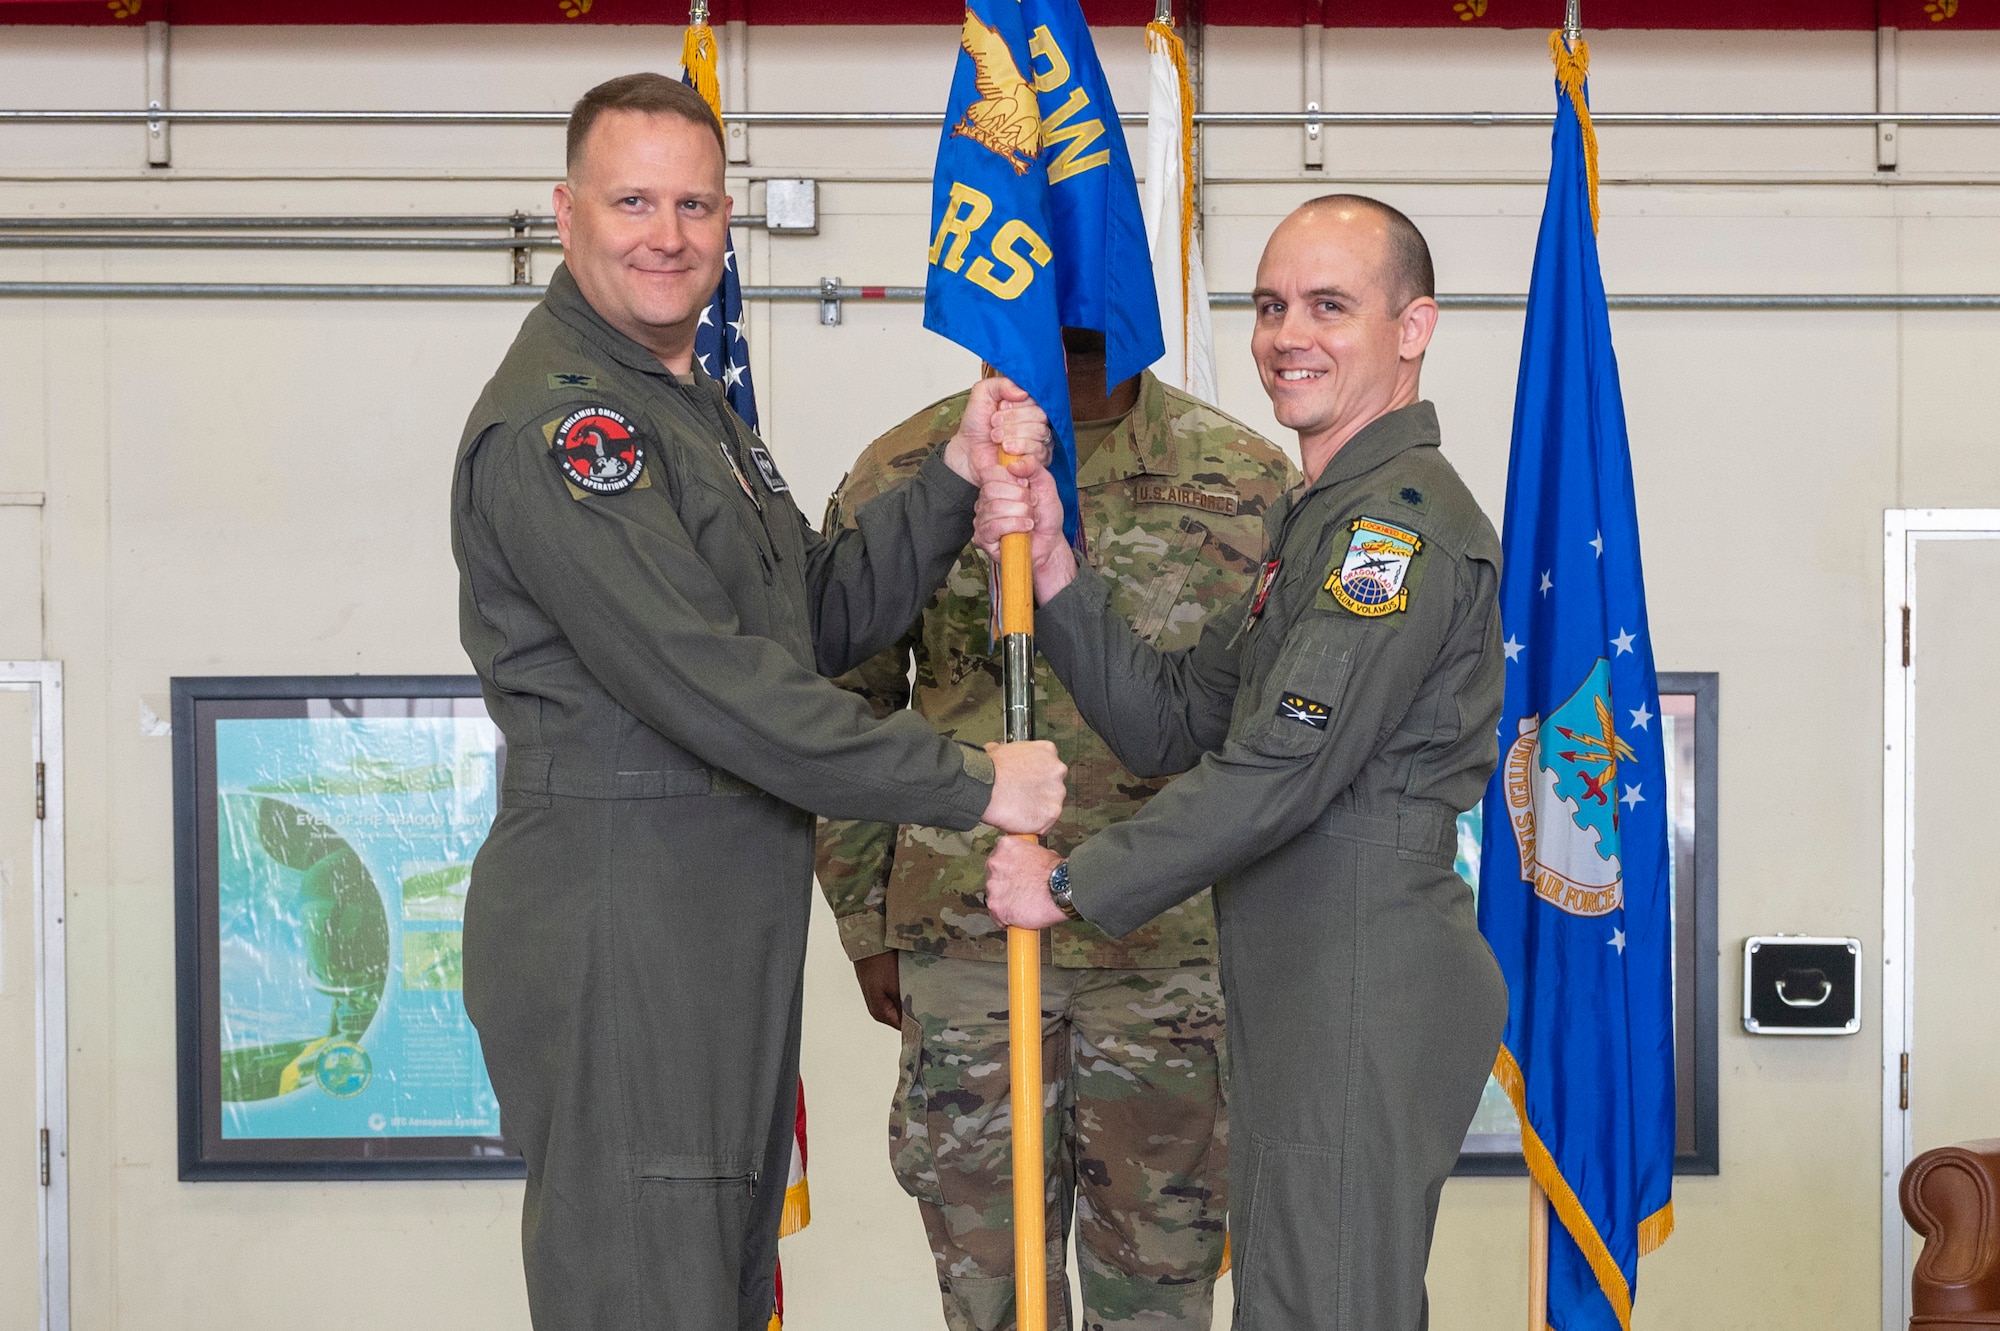 U.S. Air Force Col. Jason Bialon, left, 9th Operations Group commander, presents the guidon to Lt. Col. Brandon Olson, 5th Reconnaissance Squadron incoming commander, as a symbol of his taking command of the 5th RS at Osan Air Base, Republic of Korea, June 2, 2023. Prior to taking command, Olson served as the 5th RS director of operations. (U.S. Air Force photo by Airman 1st Class Aaron Edwards)